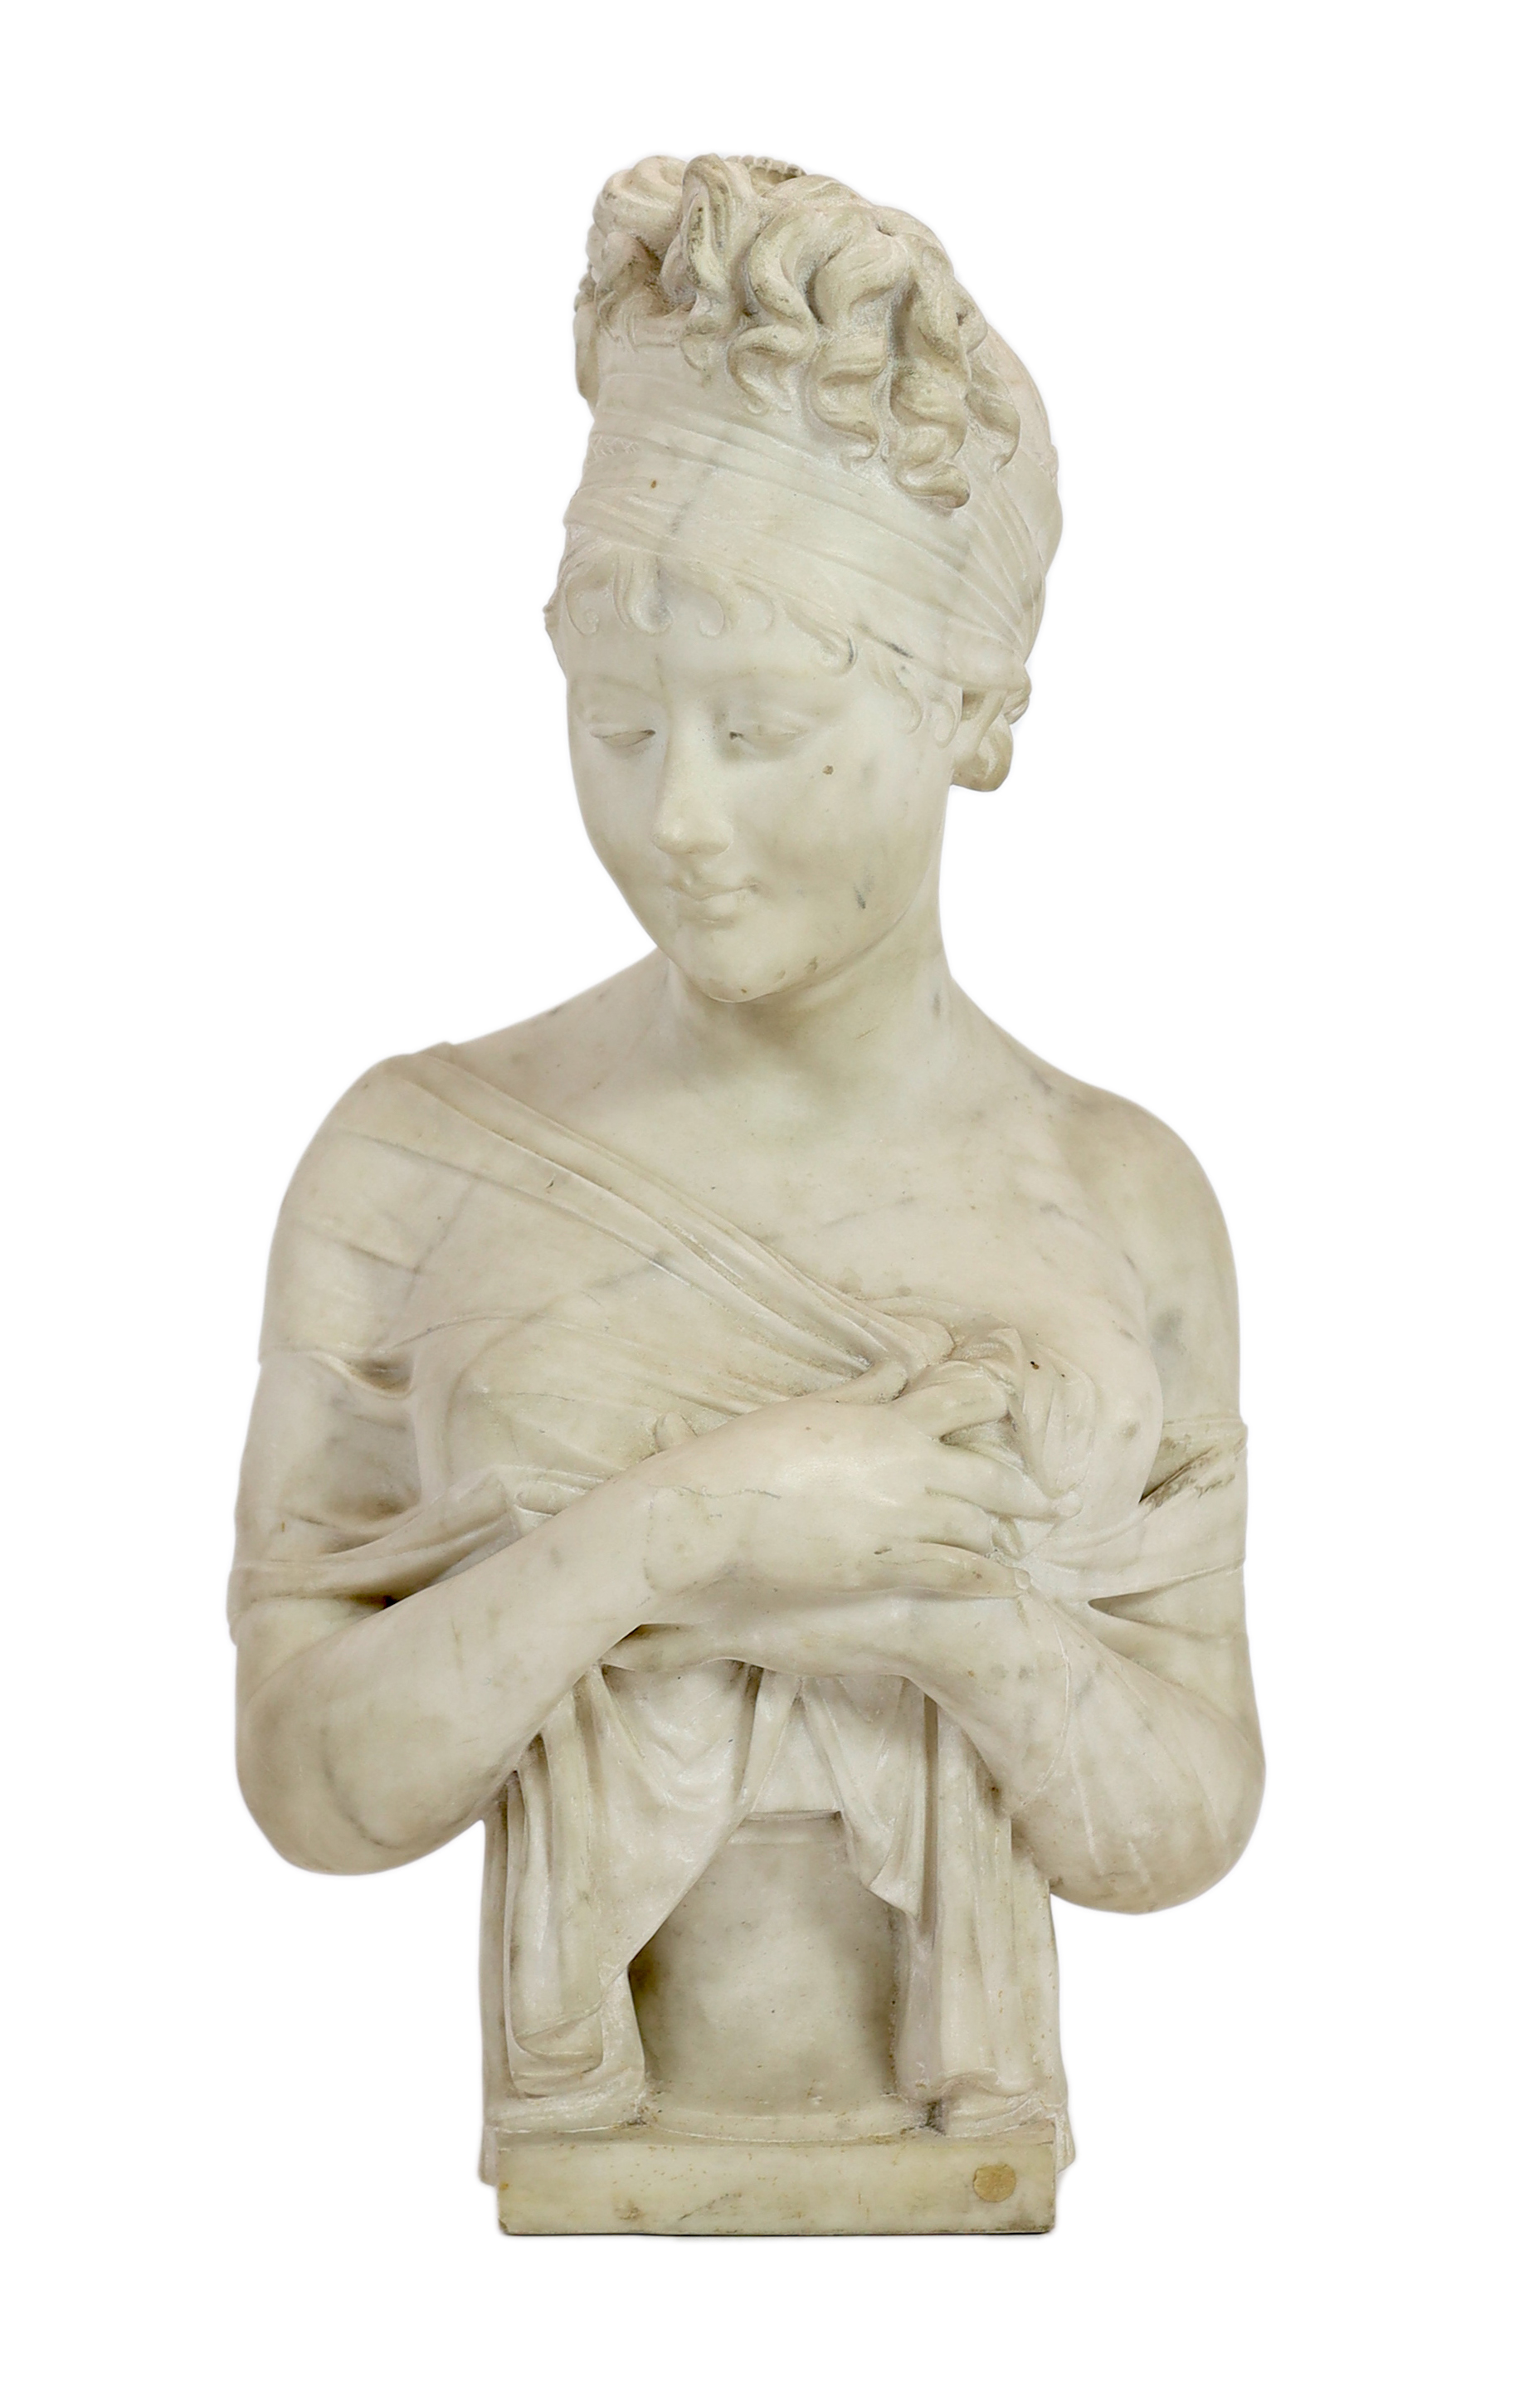 After Joseph Chinard (French 1756-1813). A French white marble bust of Juliette Récamier